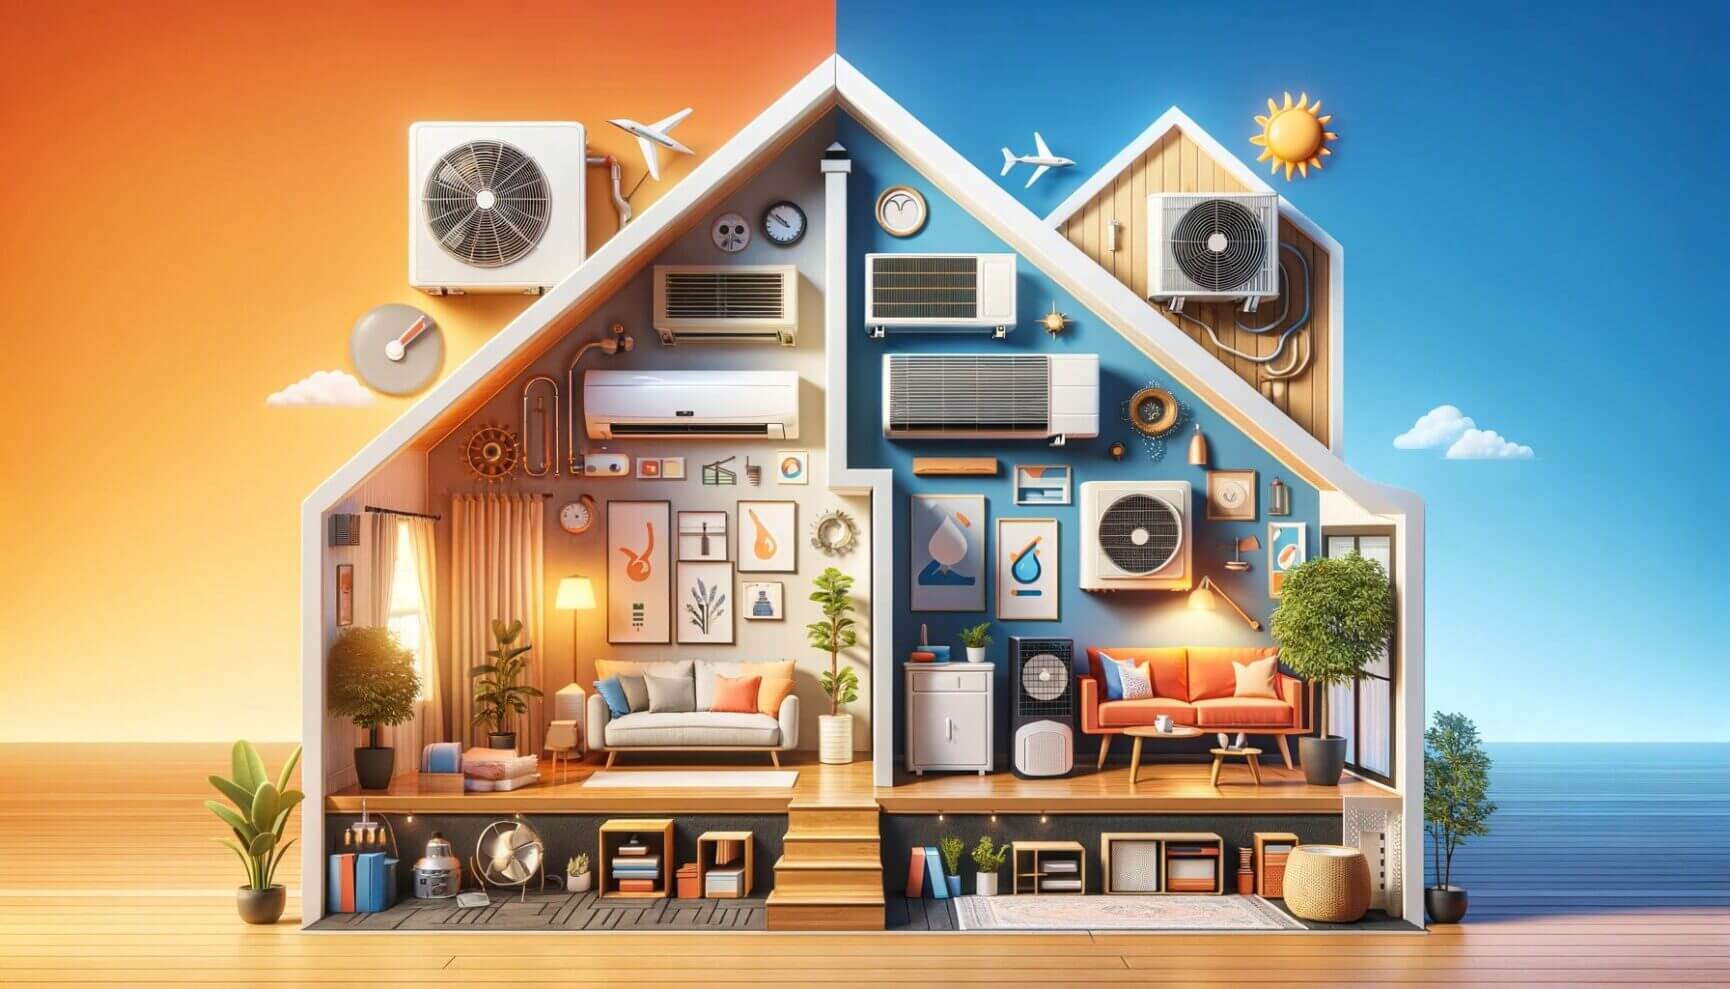 An image of a house with air conditioners and other appliances.